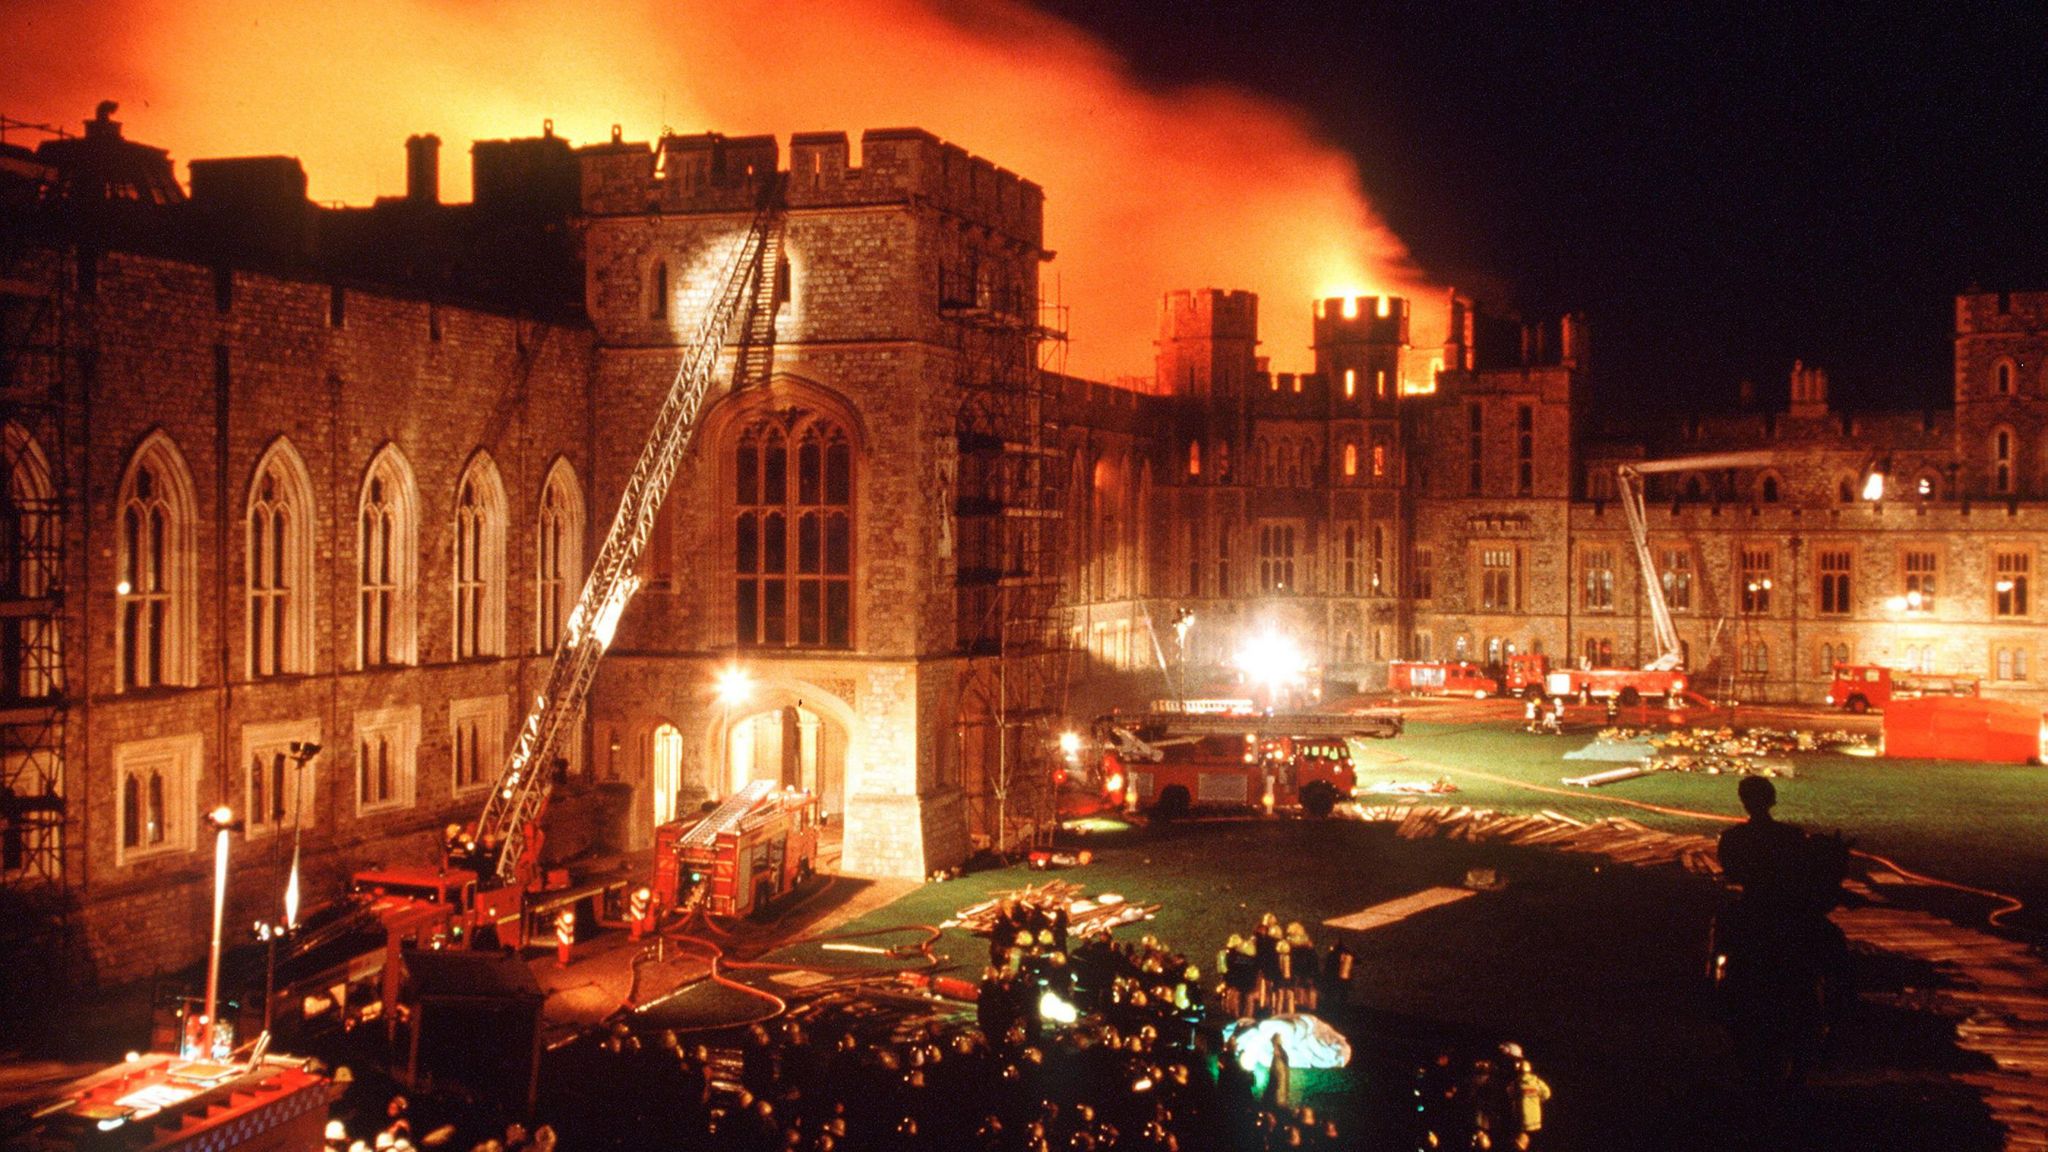 A large castle on fire in the distance, with large crowds of firefighter and fire engines in front tackling the blaze